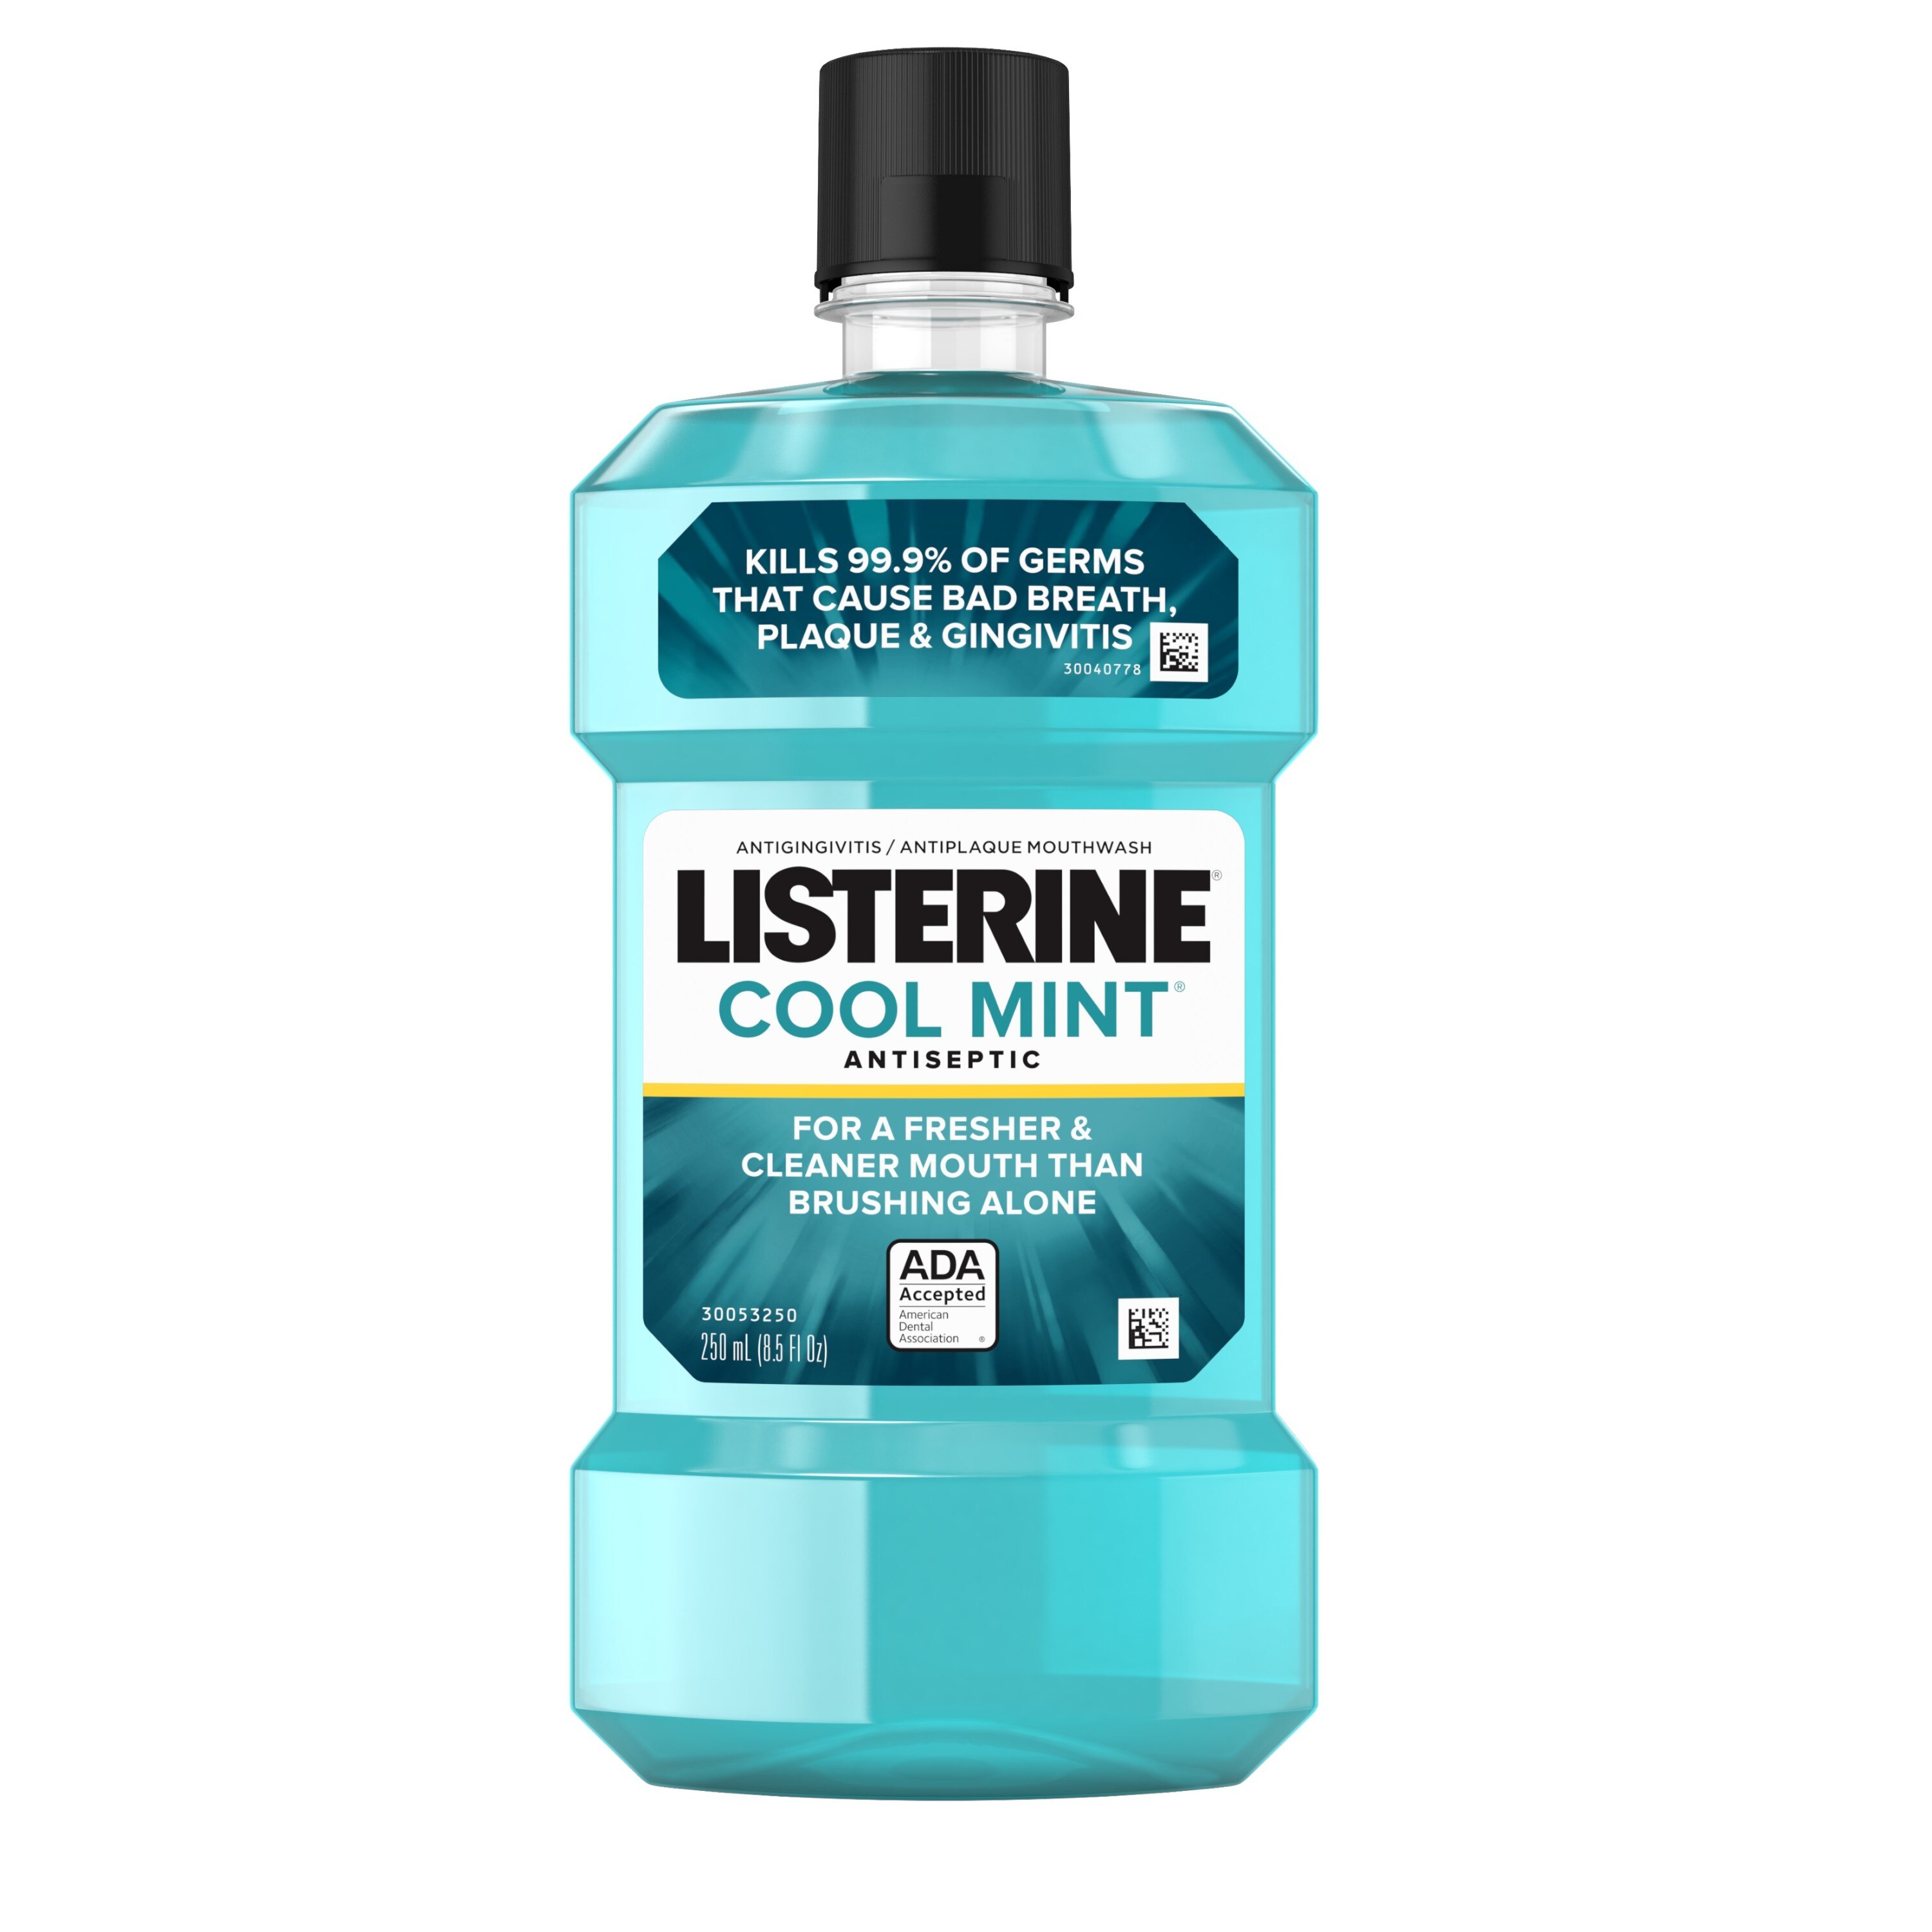 Listerine Antiseptic Mouthwash for Bad Breath, Plaque, and Gingivitis, Cool Mint